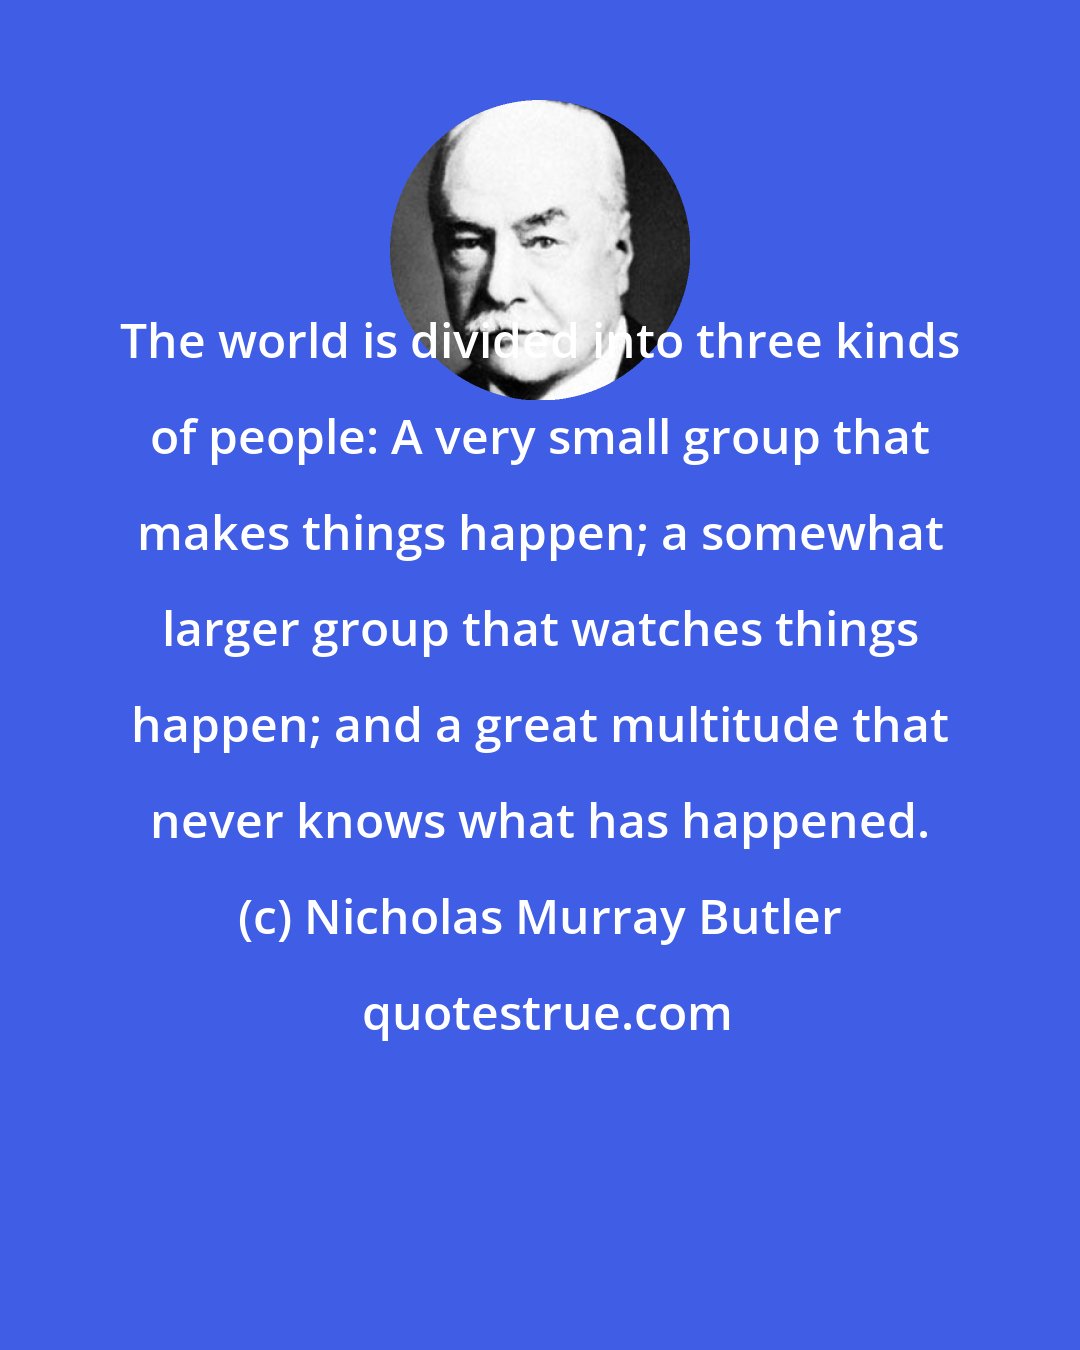 Nicholas Murray Butler: The world is divided into three kinds of people: A very small group that makes things happen; a somewhat larger group that watches things happen; and a great multitude that never knows what has happened.